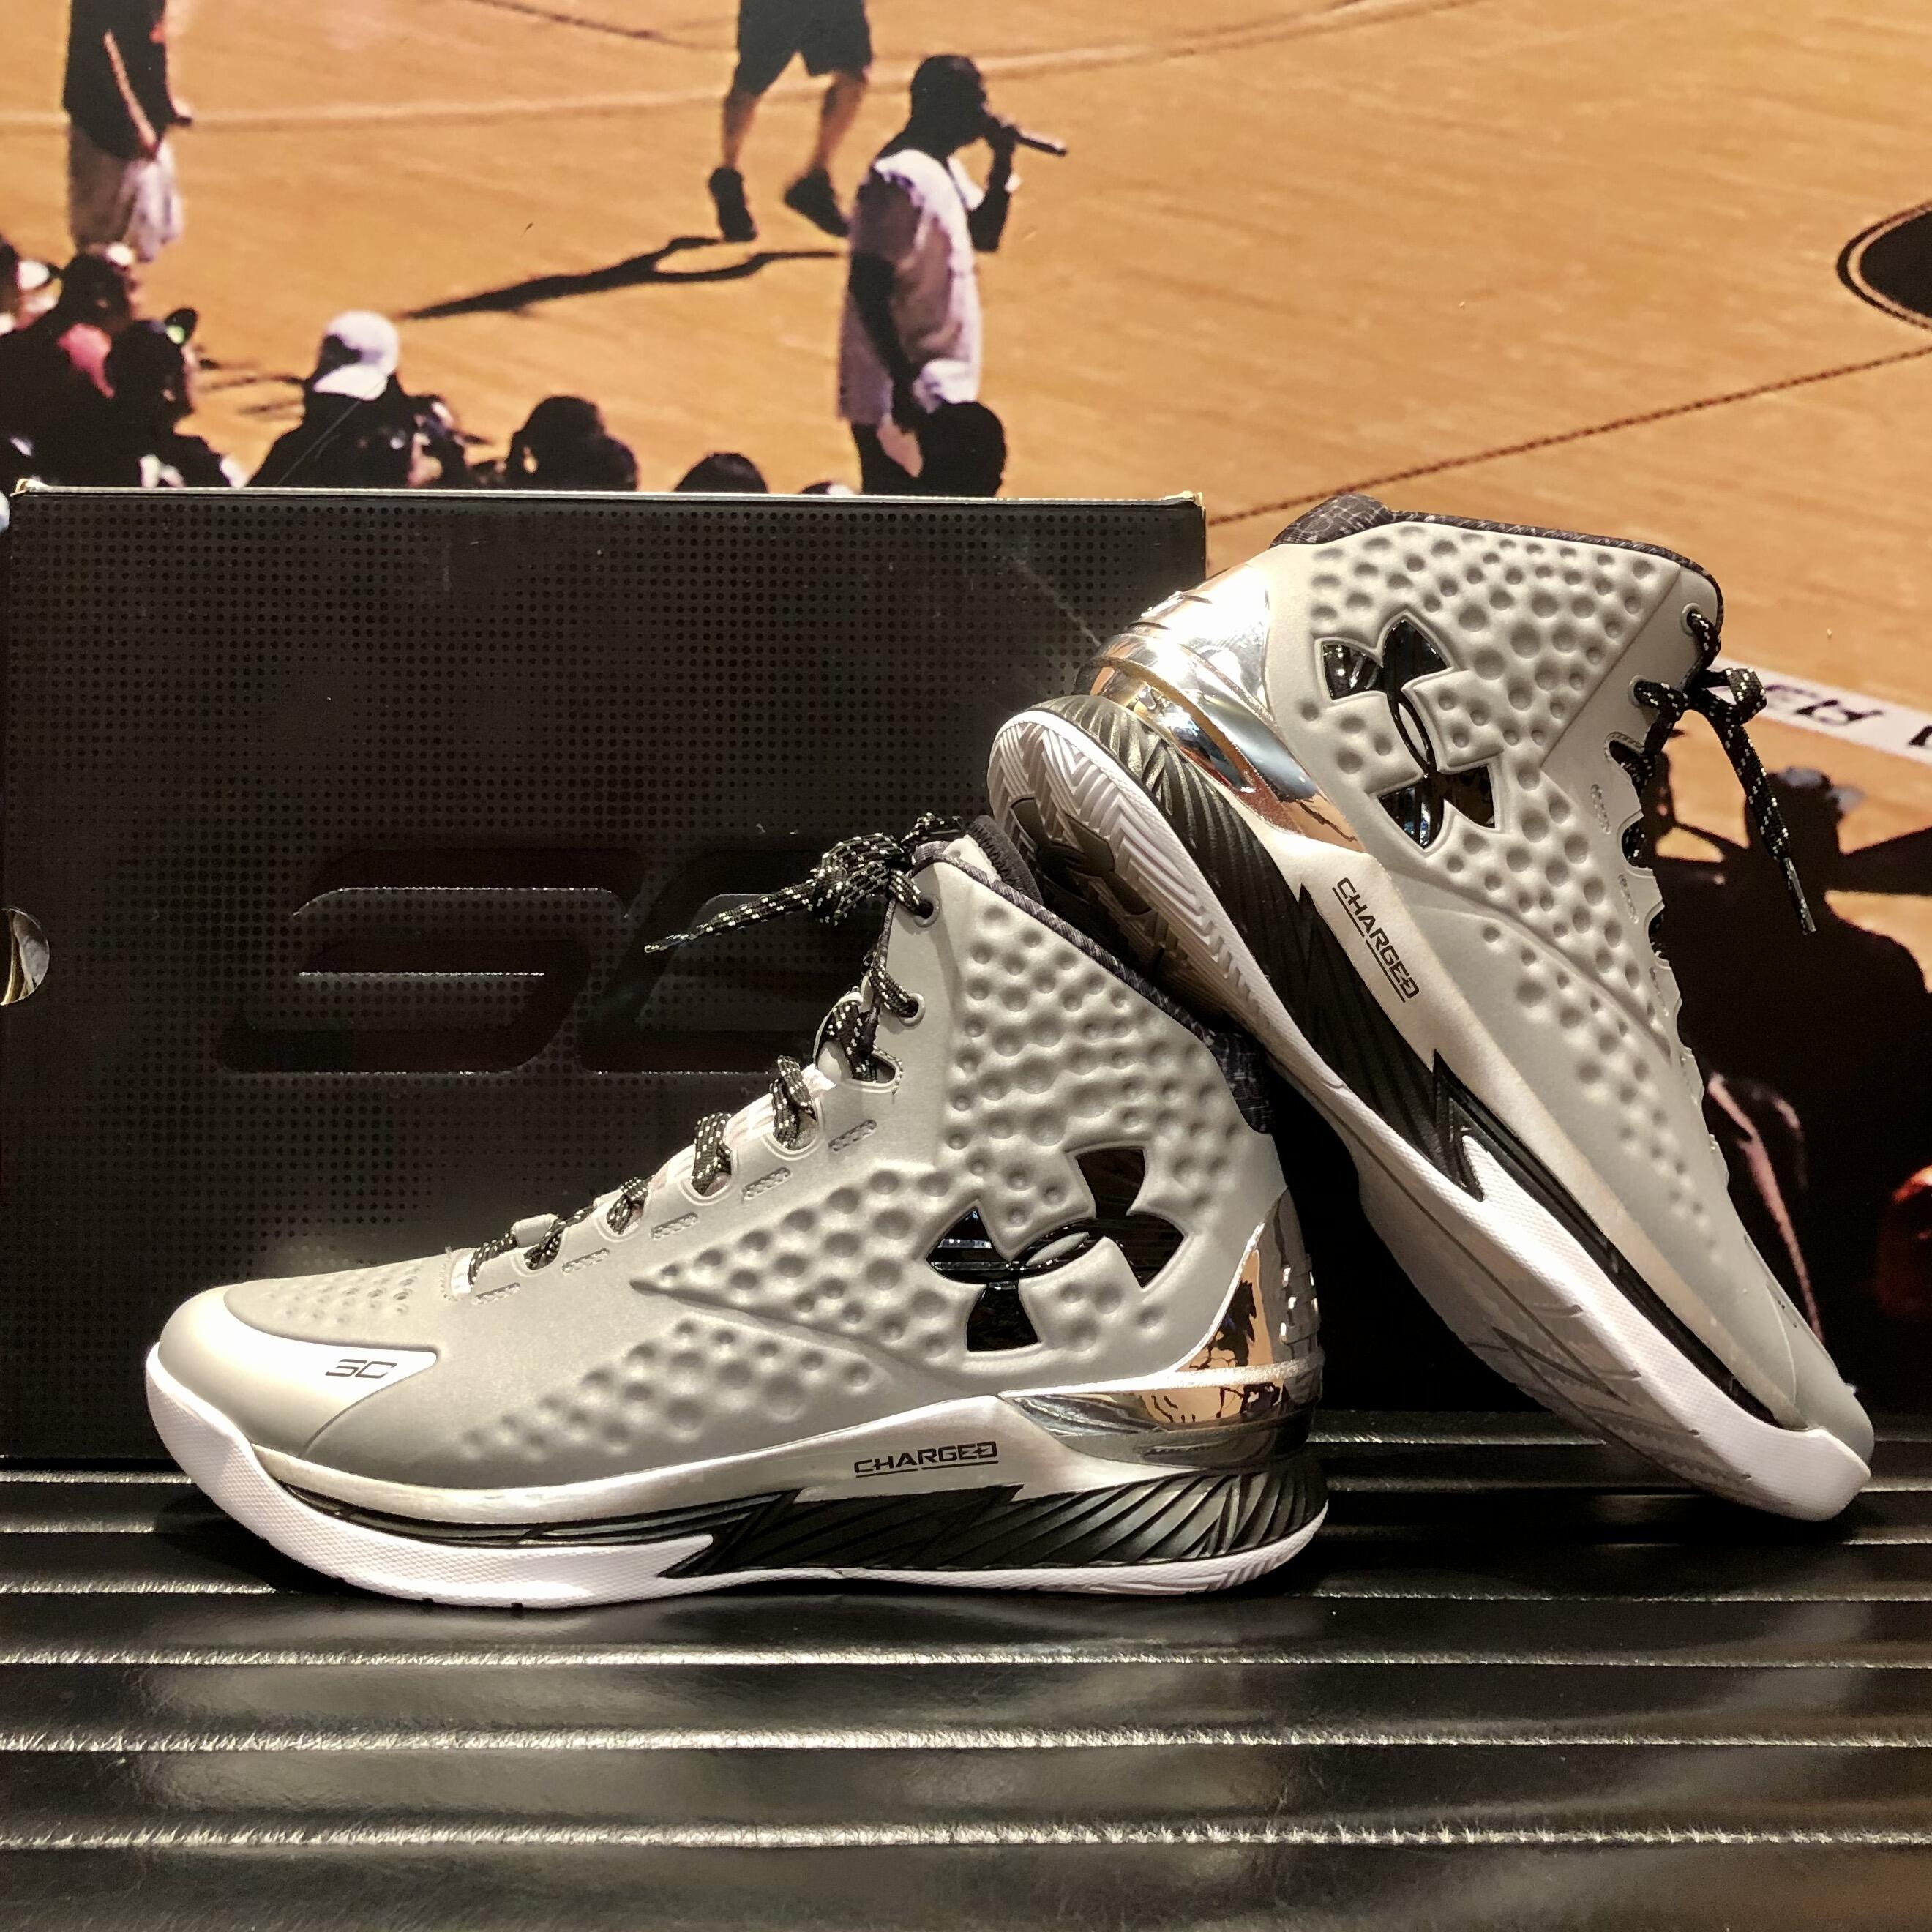 CURRY1 REFLECT | UNDER ARMOUR BRAND HOUSE 心斎橋 | SHOP BLOG ...